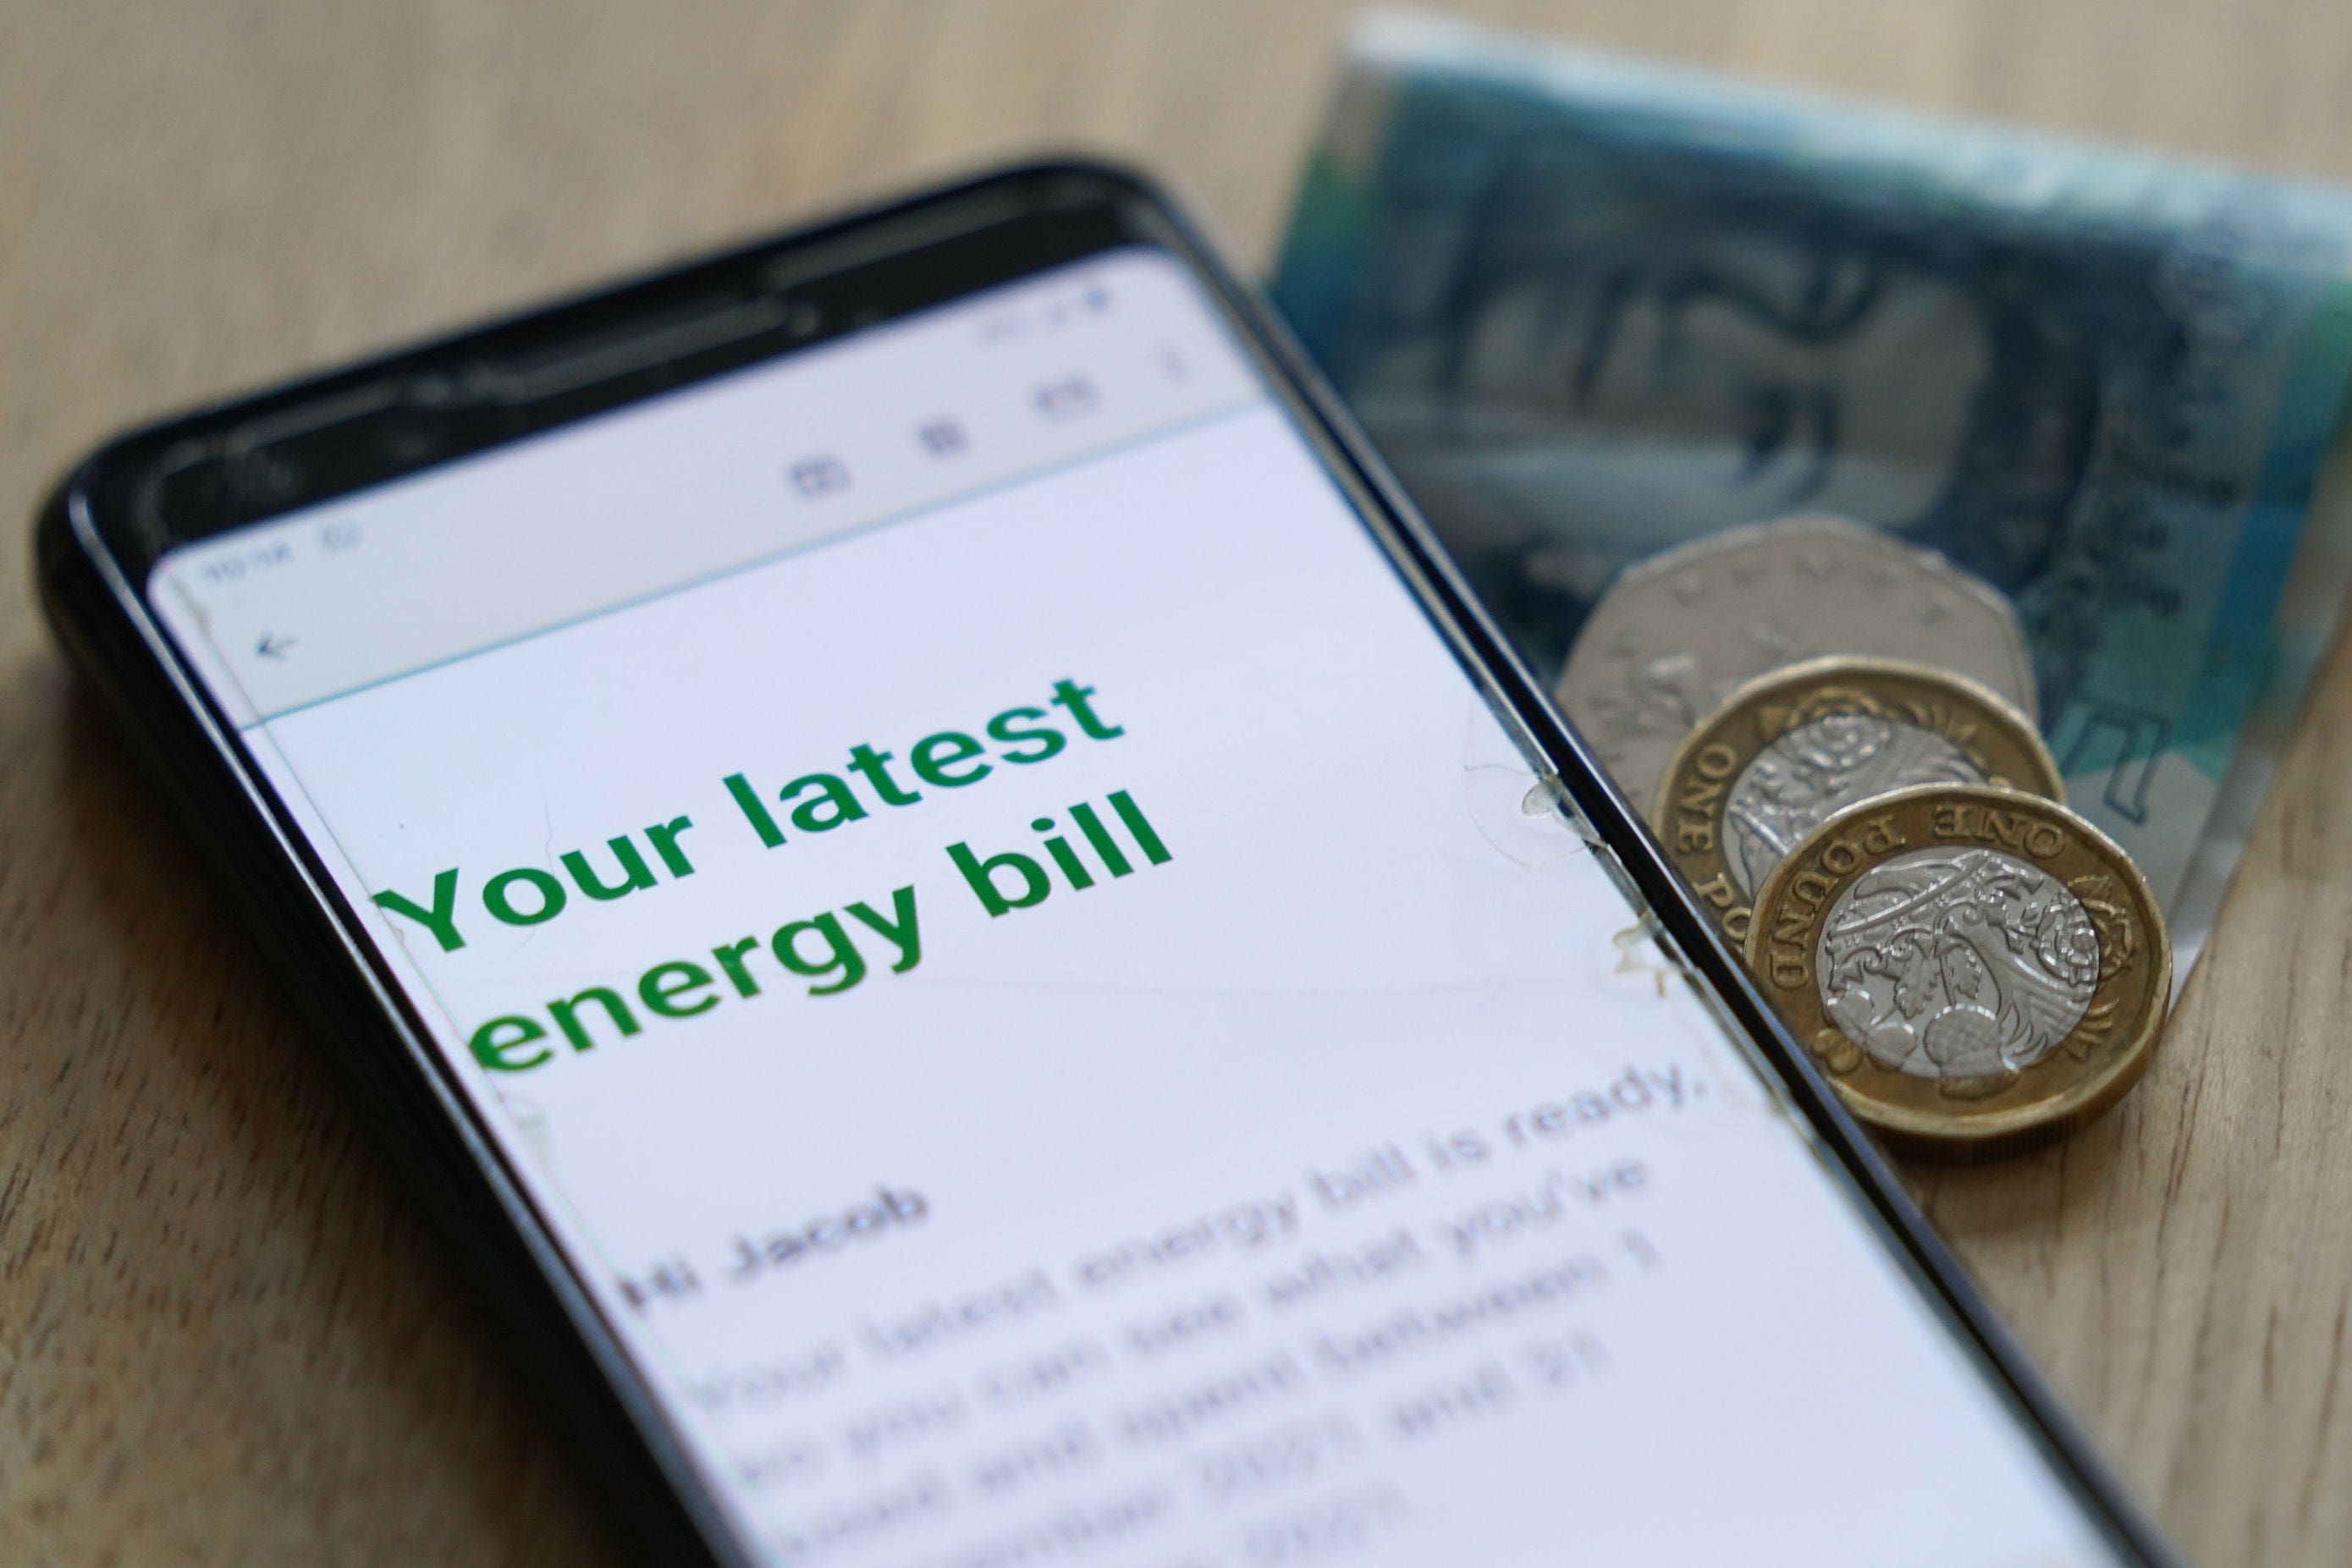 More than 9 million households have no energy credit going into winter, according to the survey